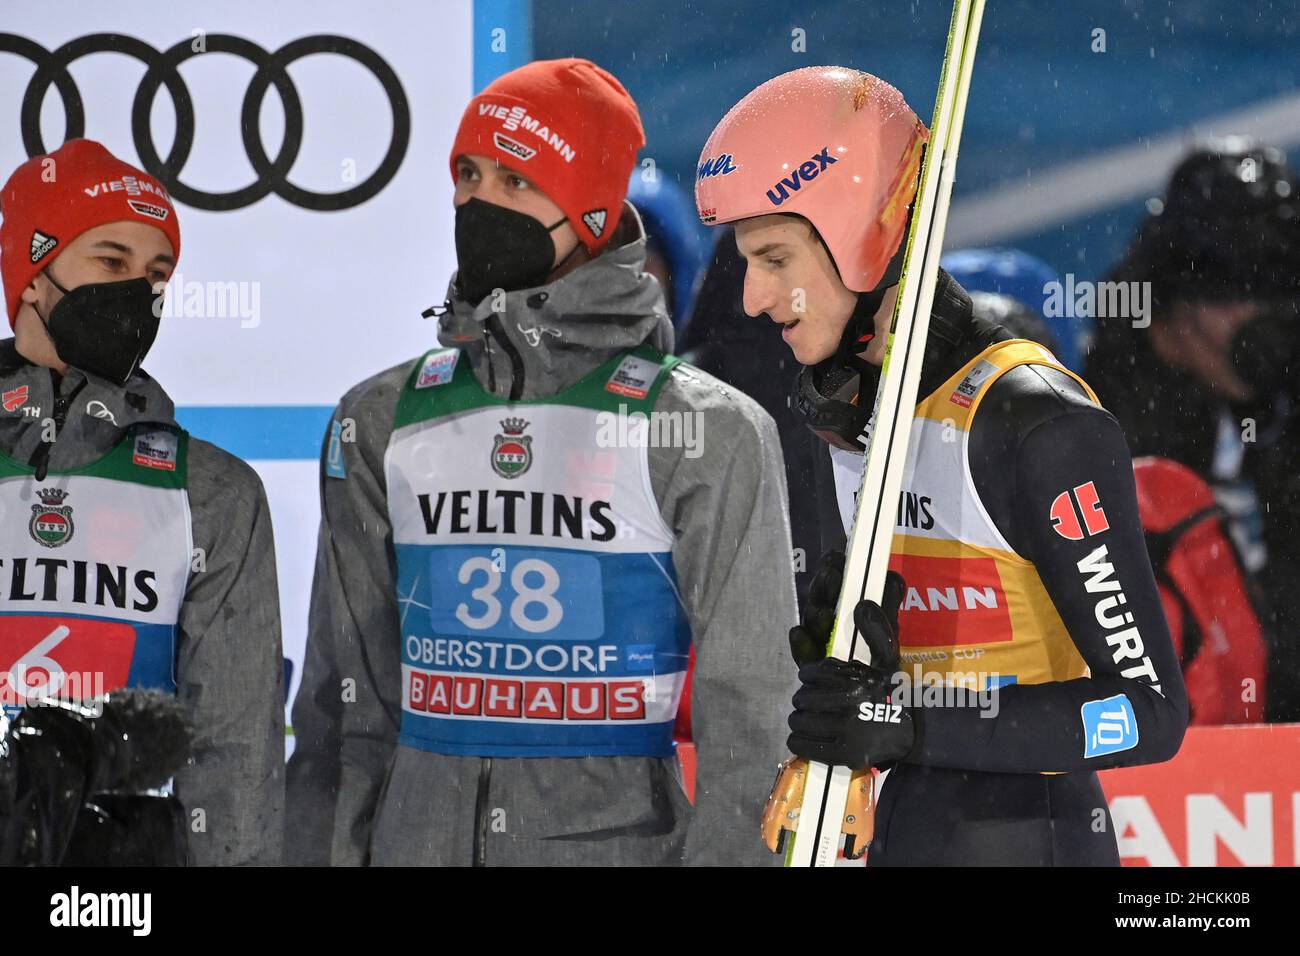 From right: Karl GEIGER (GER), Stephan LEYHE (GER) Markus EISENBICHLER (GER), ski jumping, 70th International Four Hills Tournament 2021/22, opening competition in Oberstdorf, AUDI ARENA on December 29th, 2021. Stock Photo